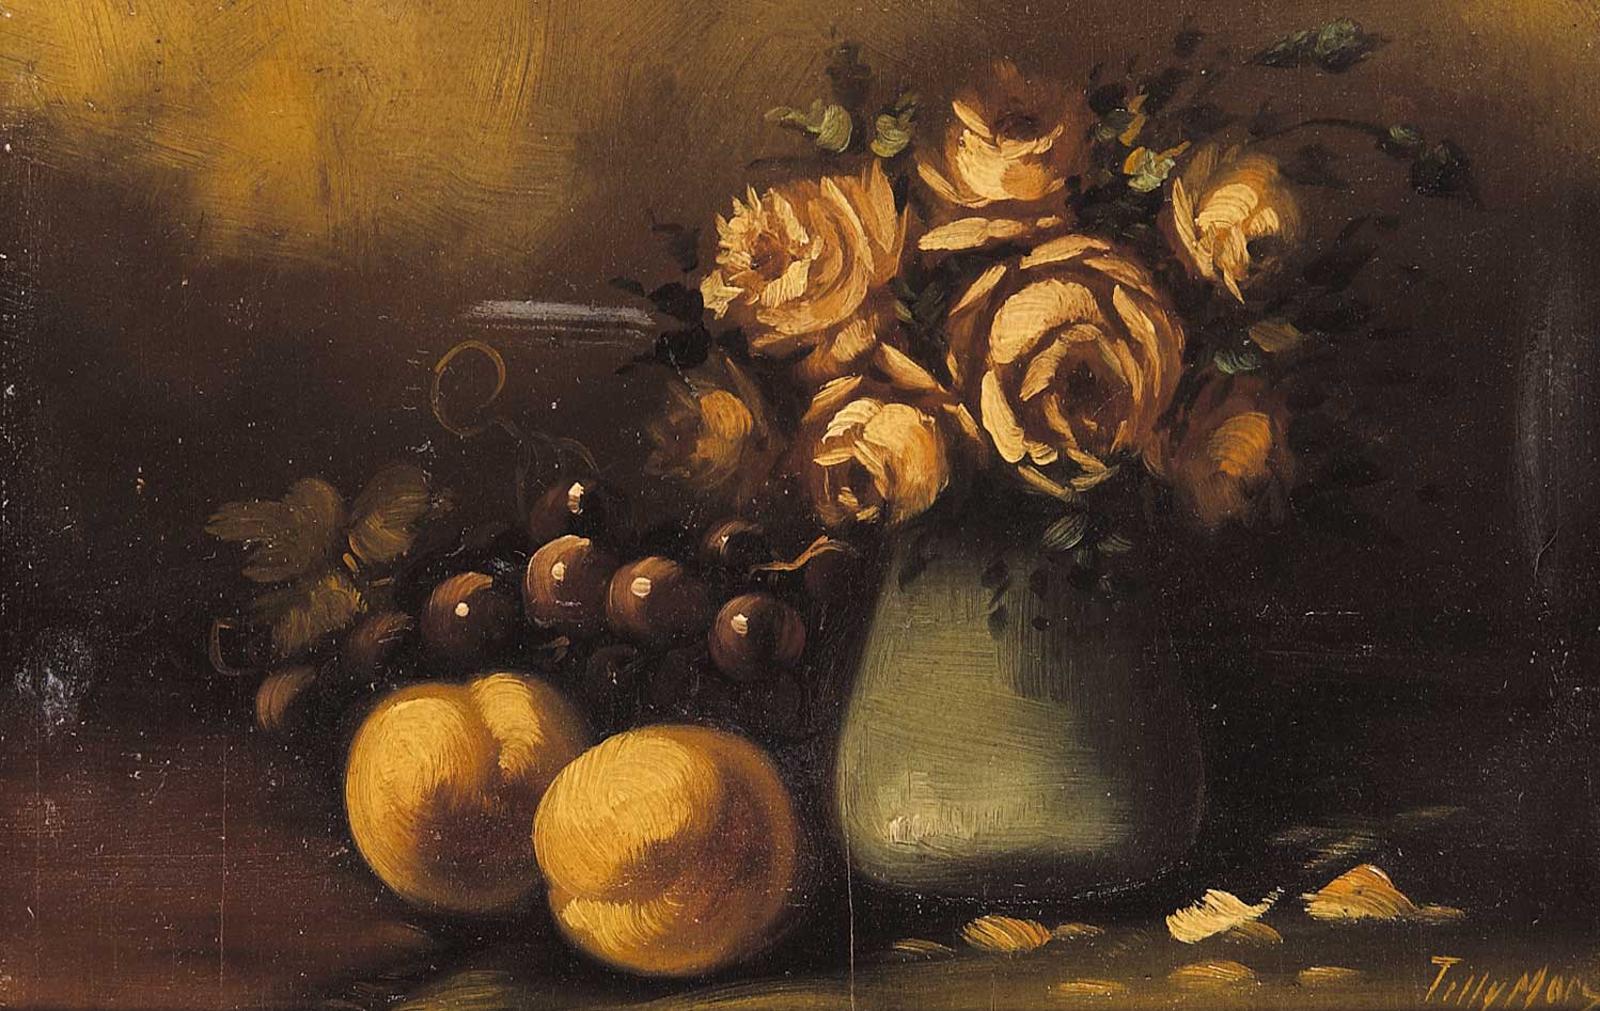 Tilly Moes - Untitled - Still Life with Roses and Fruit